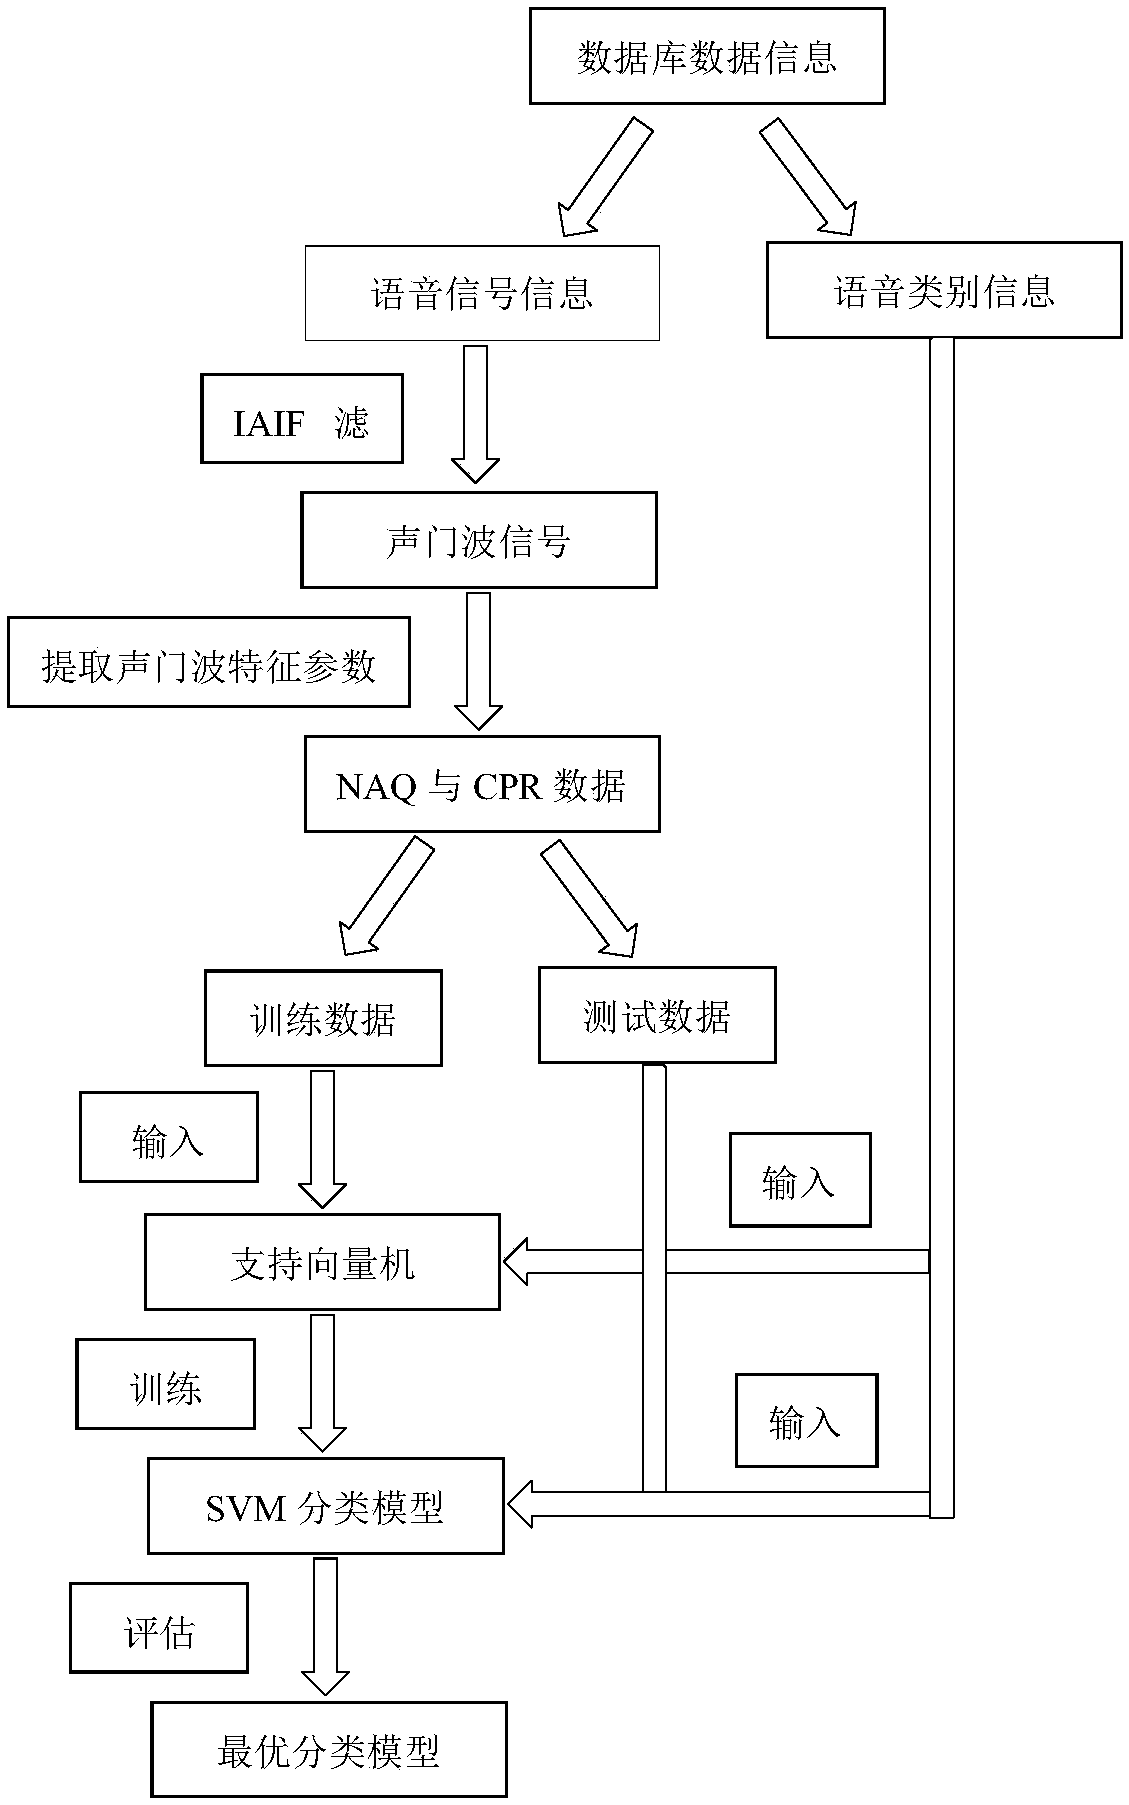 Voice anomaly detection method based on sound source characteristics